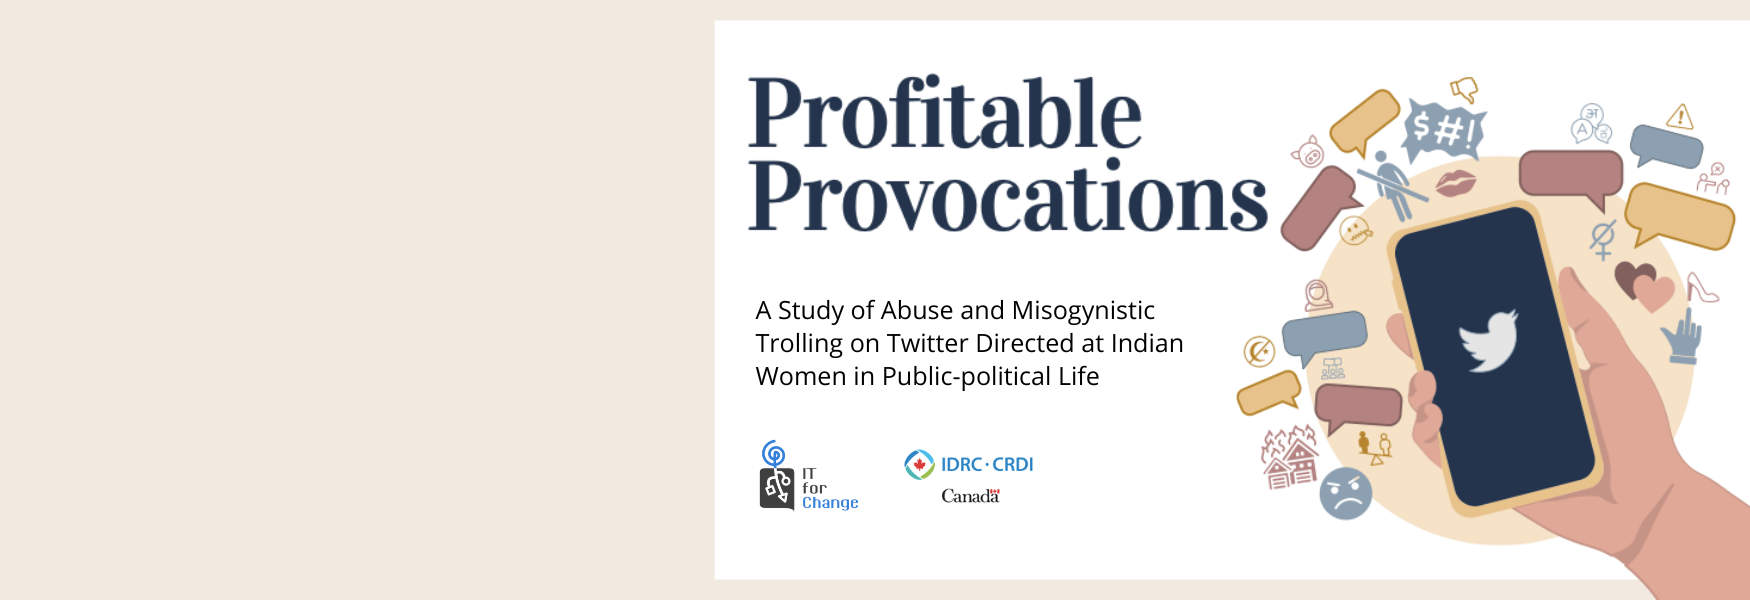 A Study of Abuse and Misogynistic Trolling on Twitter Directed at Indian Women in Public-political Life